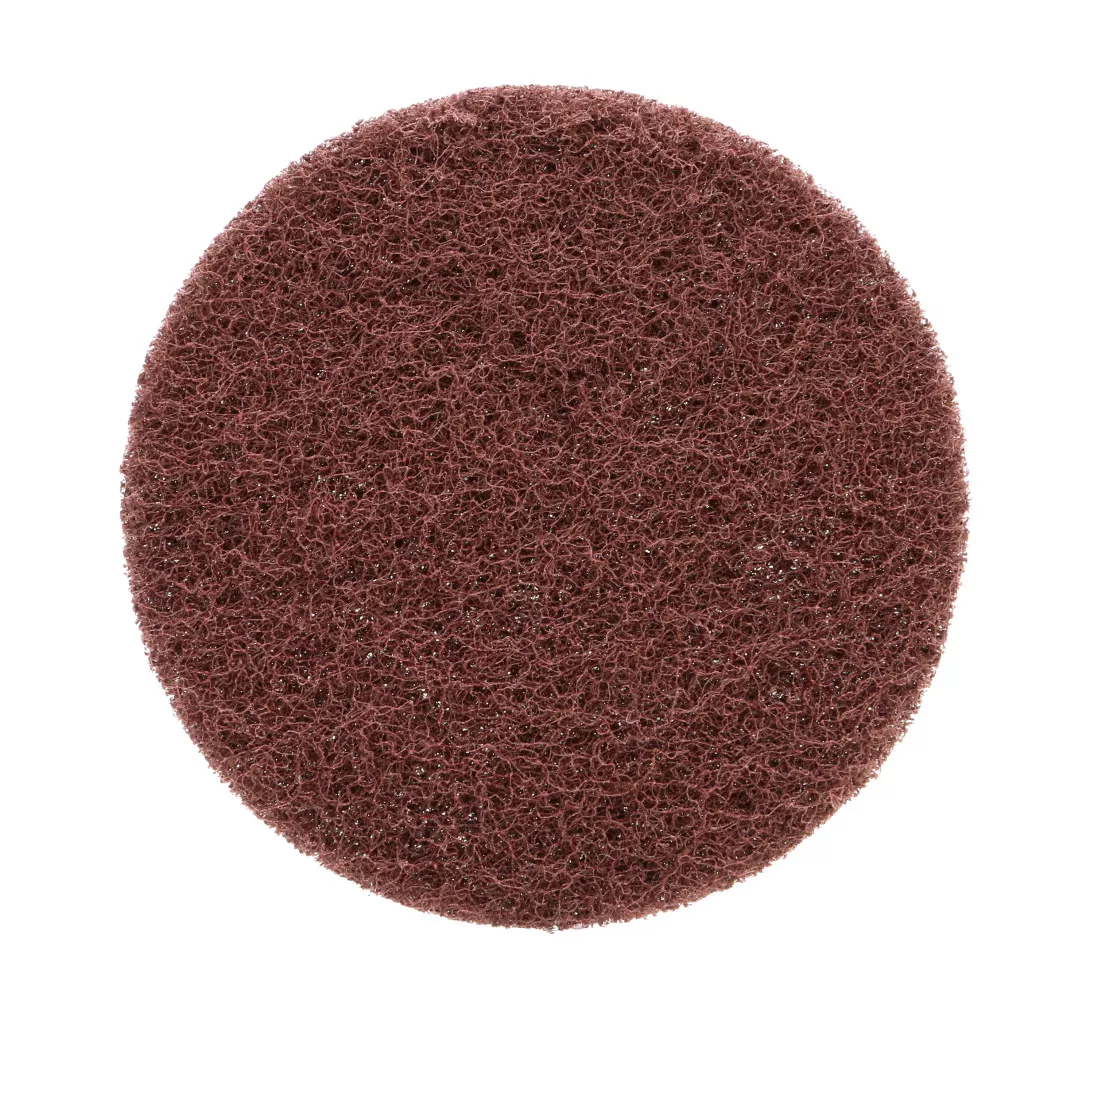 Standard Abrasives™ Buff and Blend Hook and Loop GP Disc 831610, 5 in
A MED, 10 per inner 100 per case